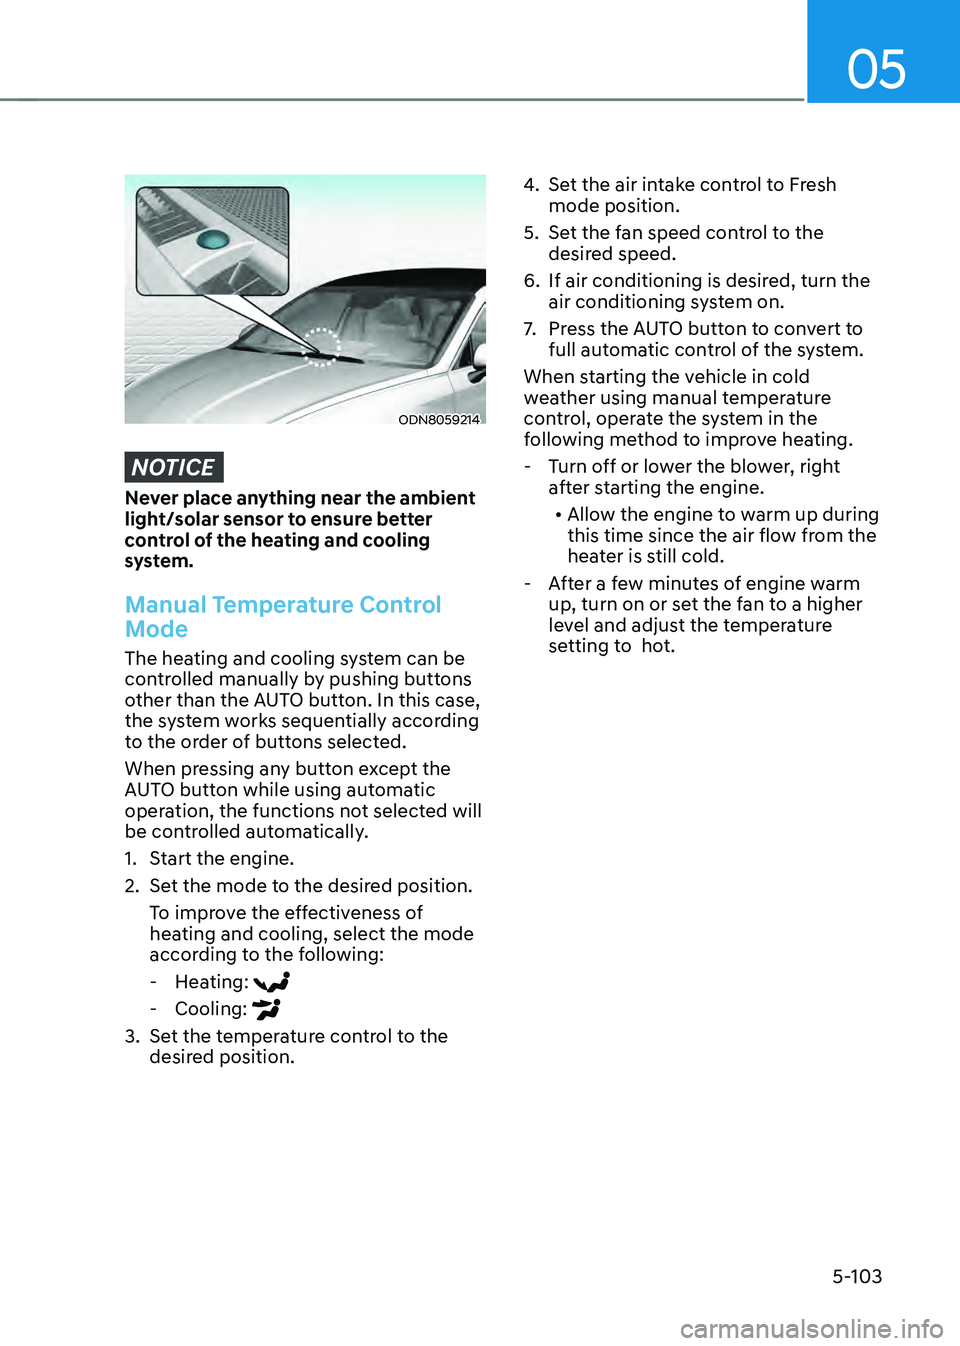 HYUNDAI SONATA HYBRID 2022  Owners Manual 05
5-103
ODN8059214
NOTICE
Never place anything near the ambient 
light/solar sensor to ensure better 
control of the heating and cooling 
system.
Manual Temperature Control 
Mode
The heating and cool